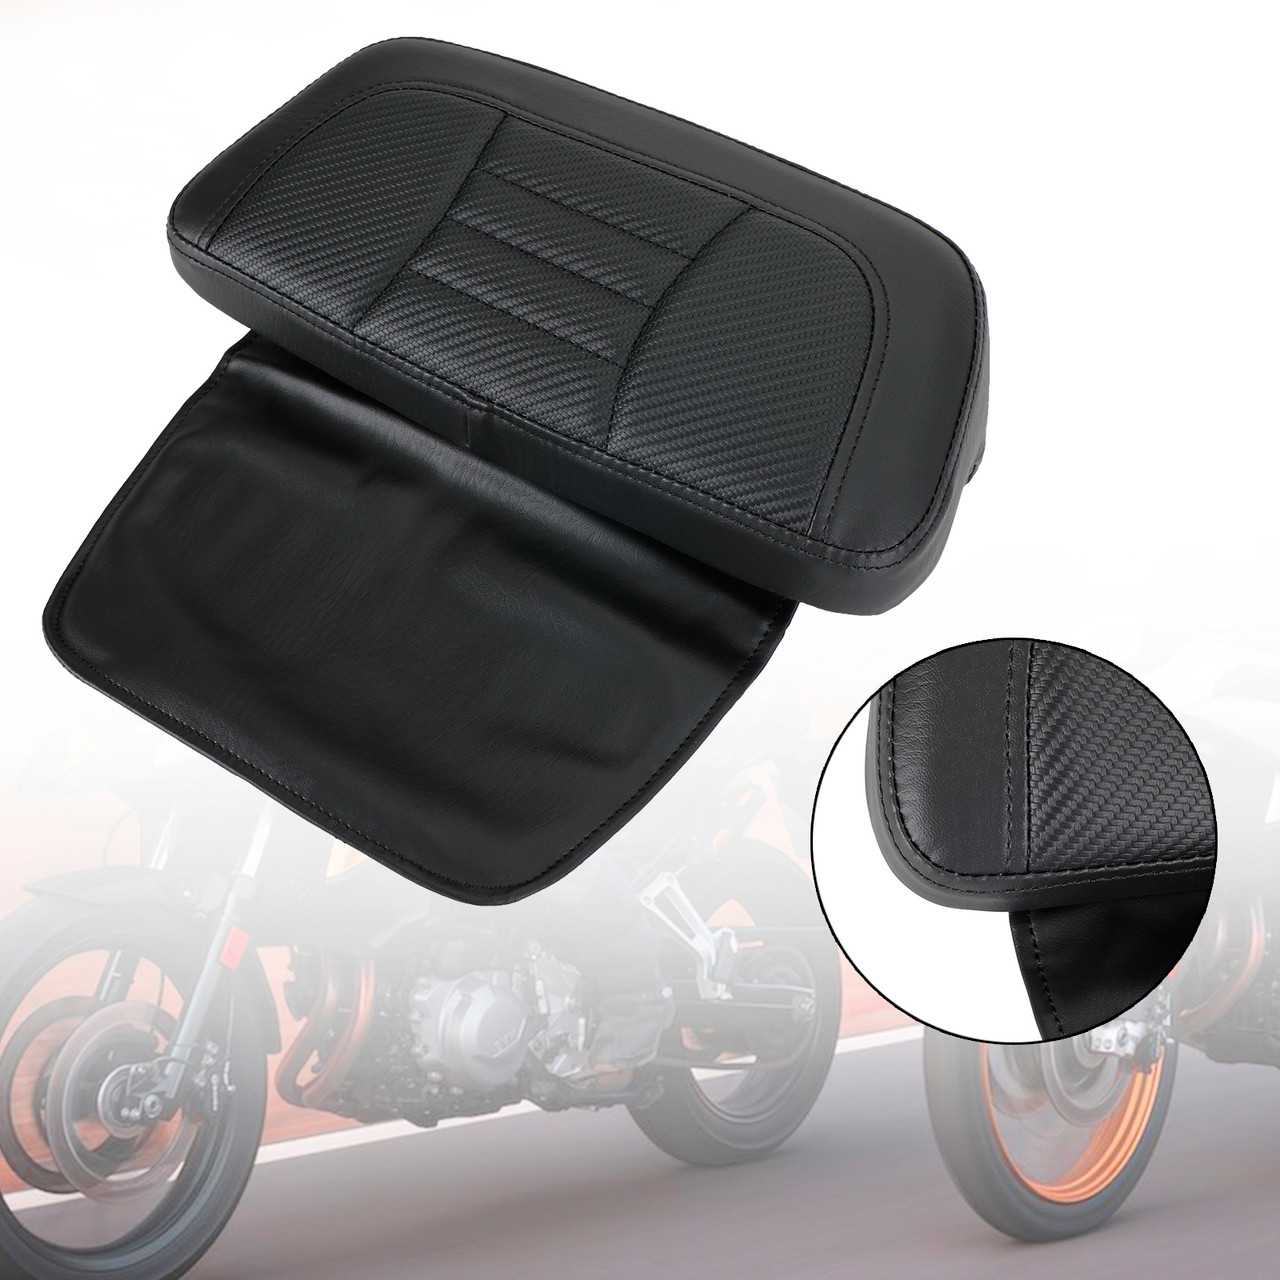 Chopped Pack Trunk Backrest Pad fit for Tour Pak Touring FL Road Glide 2014-Up BLK